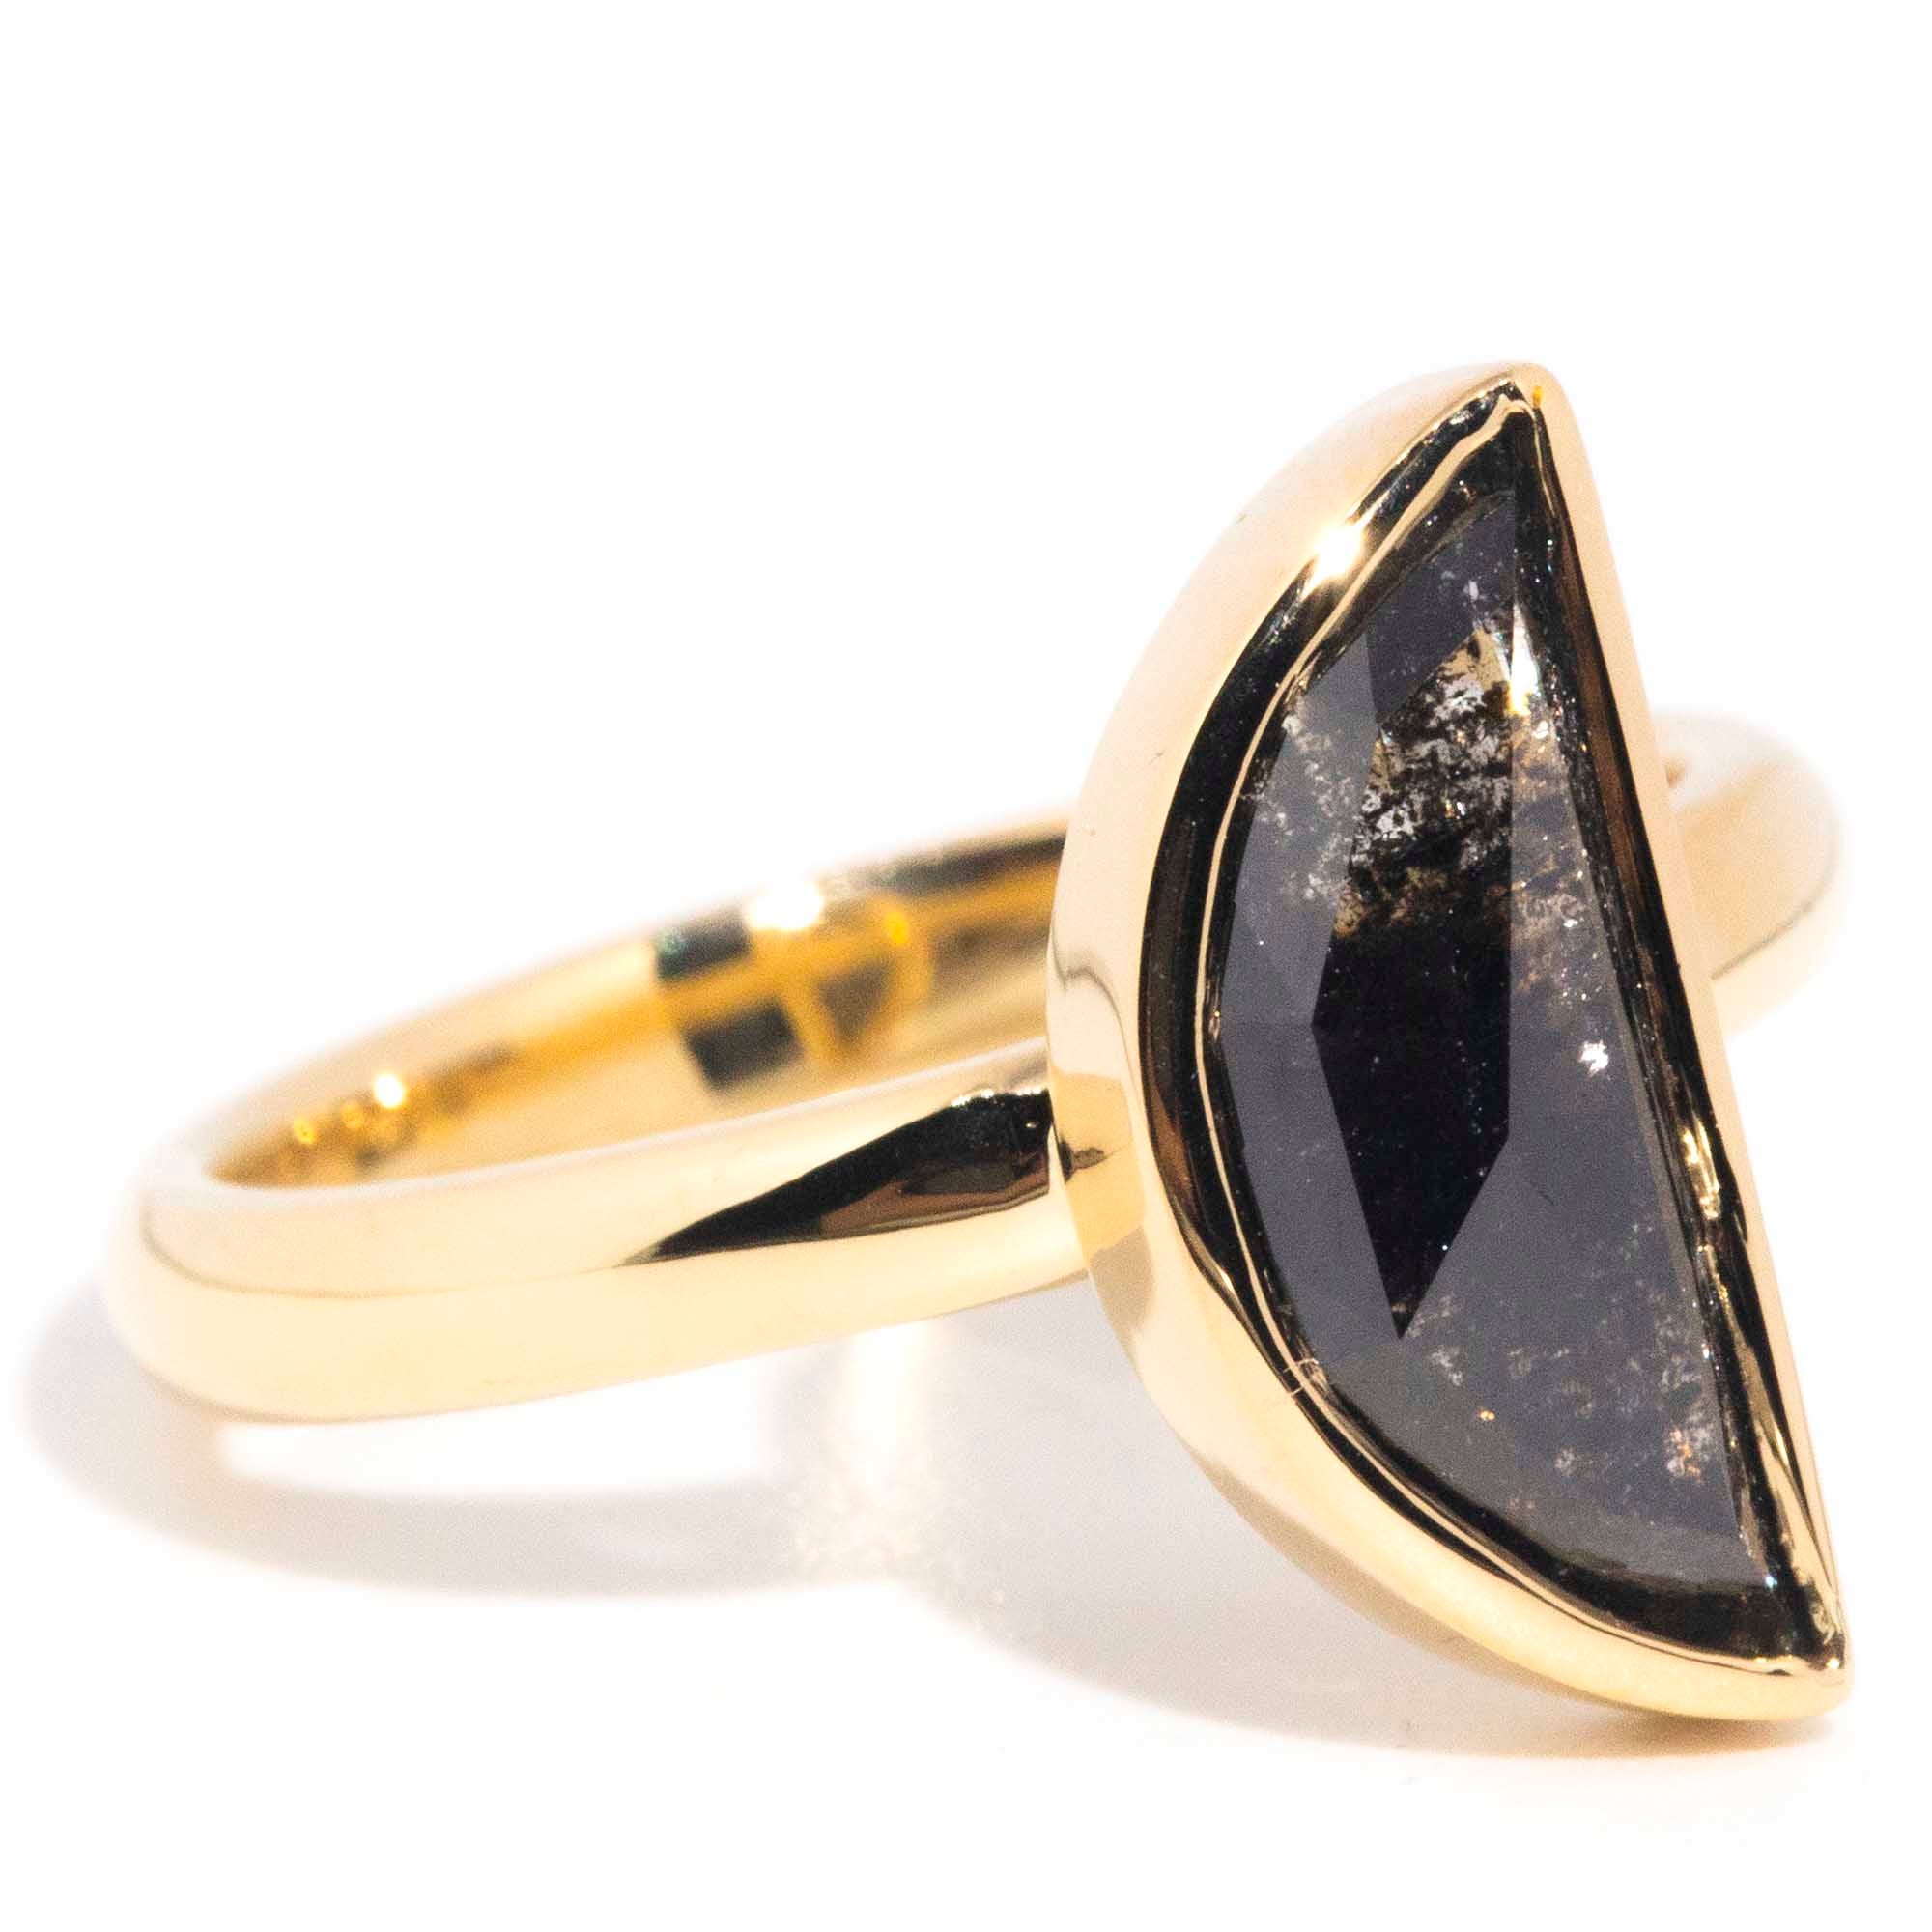 Piper 18ct Yellow Gold Half Moon Shaped Black Diamond Ring* LB OB Gemmo $ Rings Imperial Jewellery